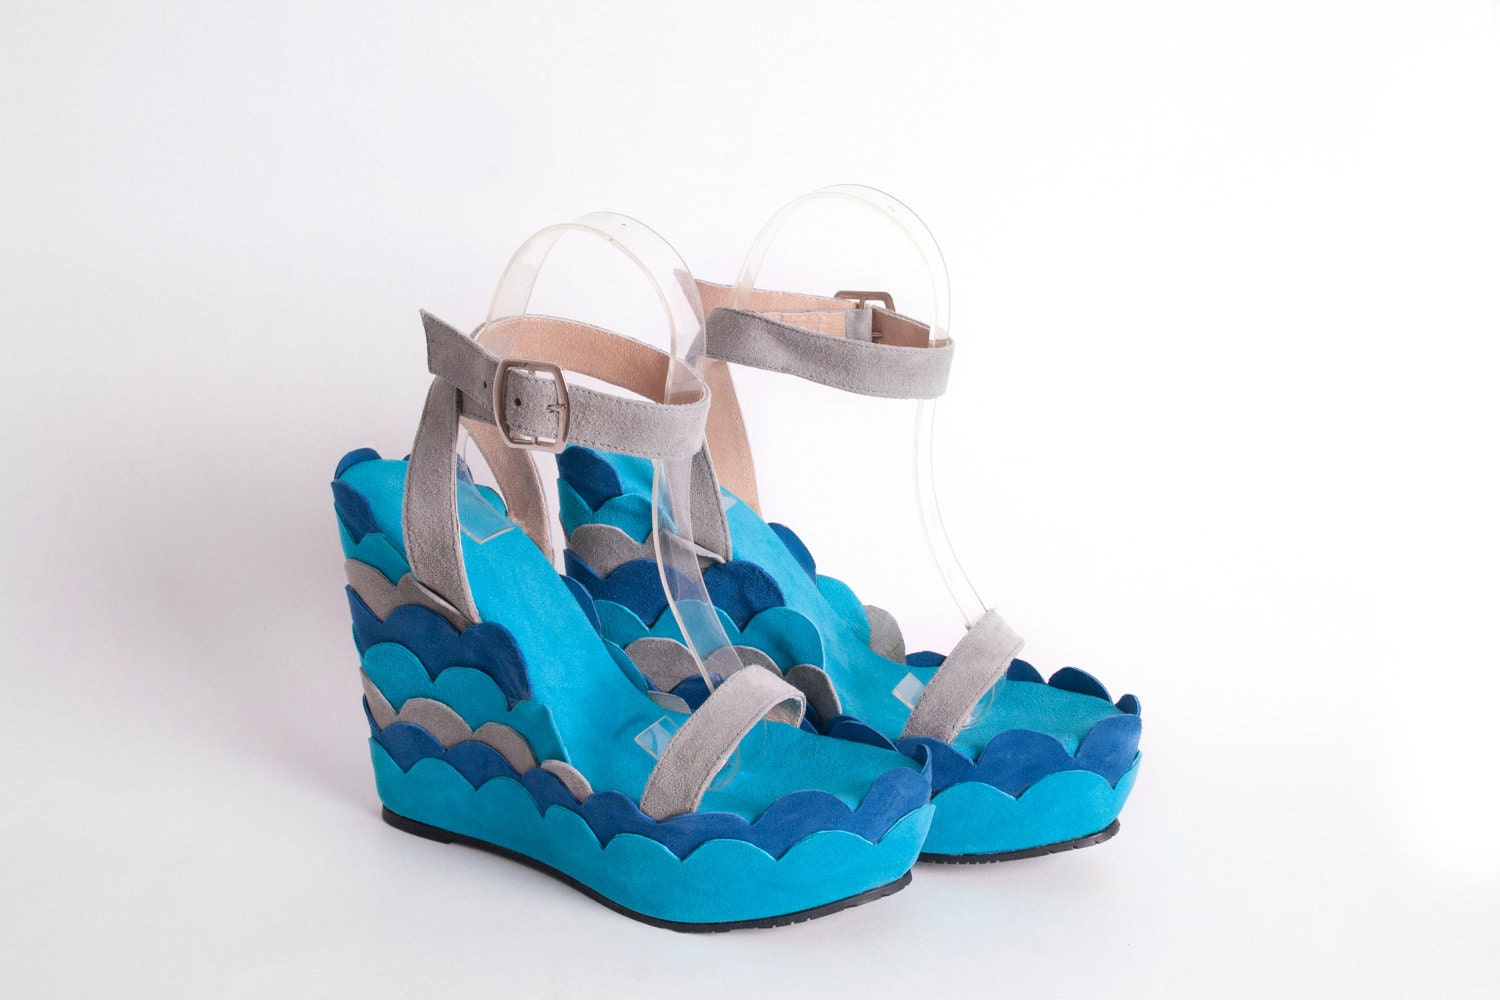 WEDGES - Wrapped leather platform, in blue and grey - made to order - NorTin